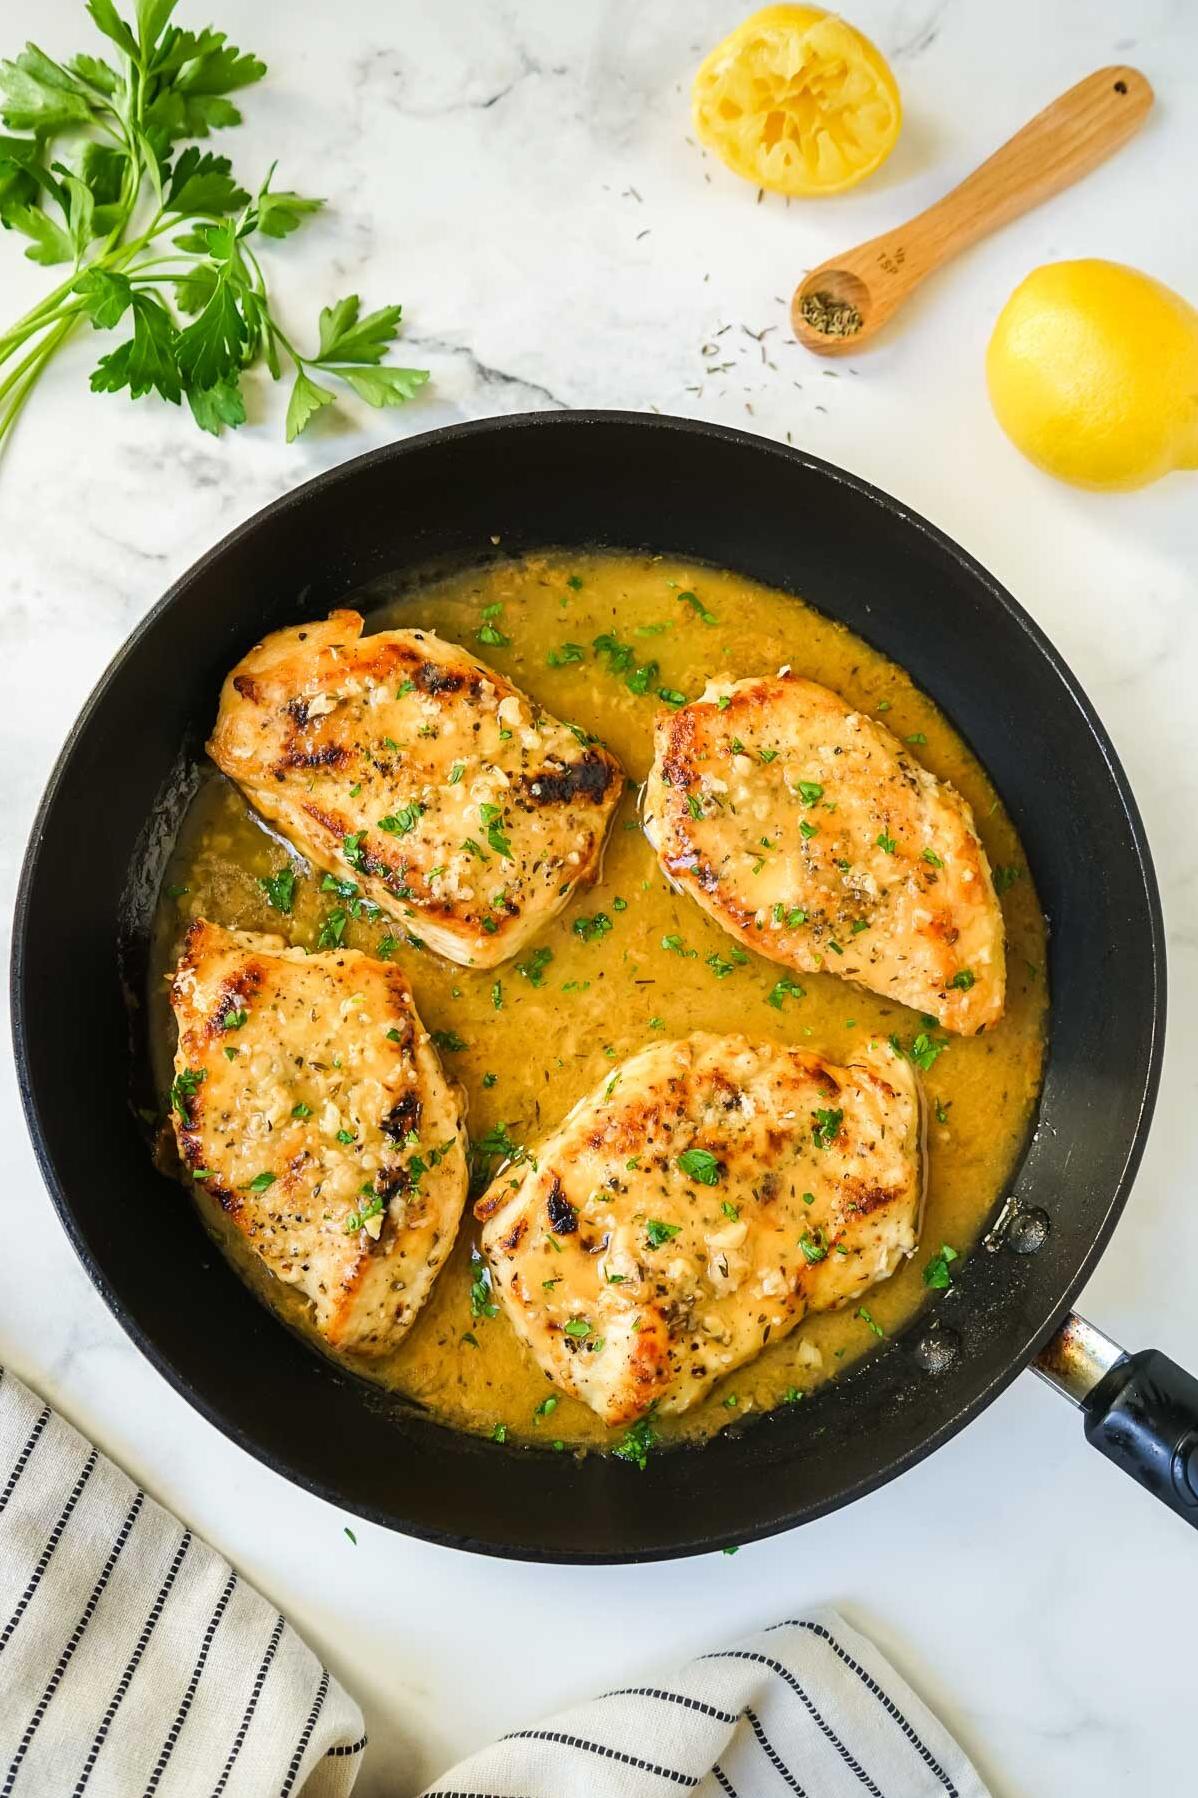  A medallion of chicken smothered in a flavorful white wine sauce.